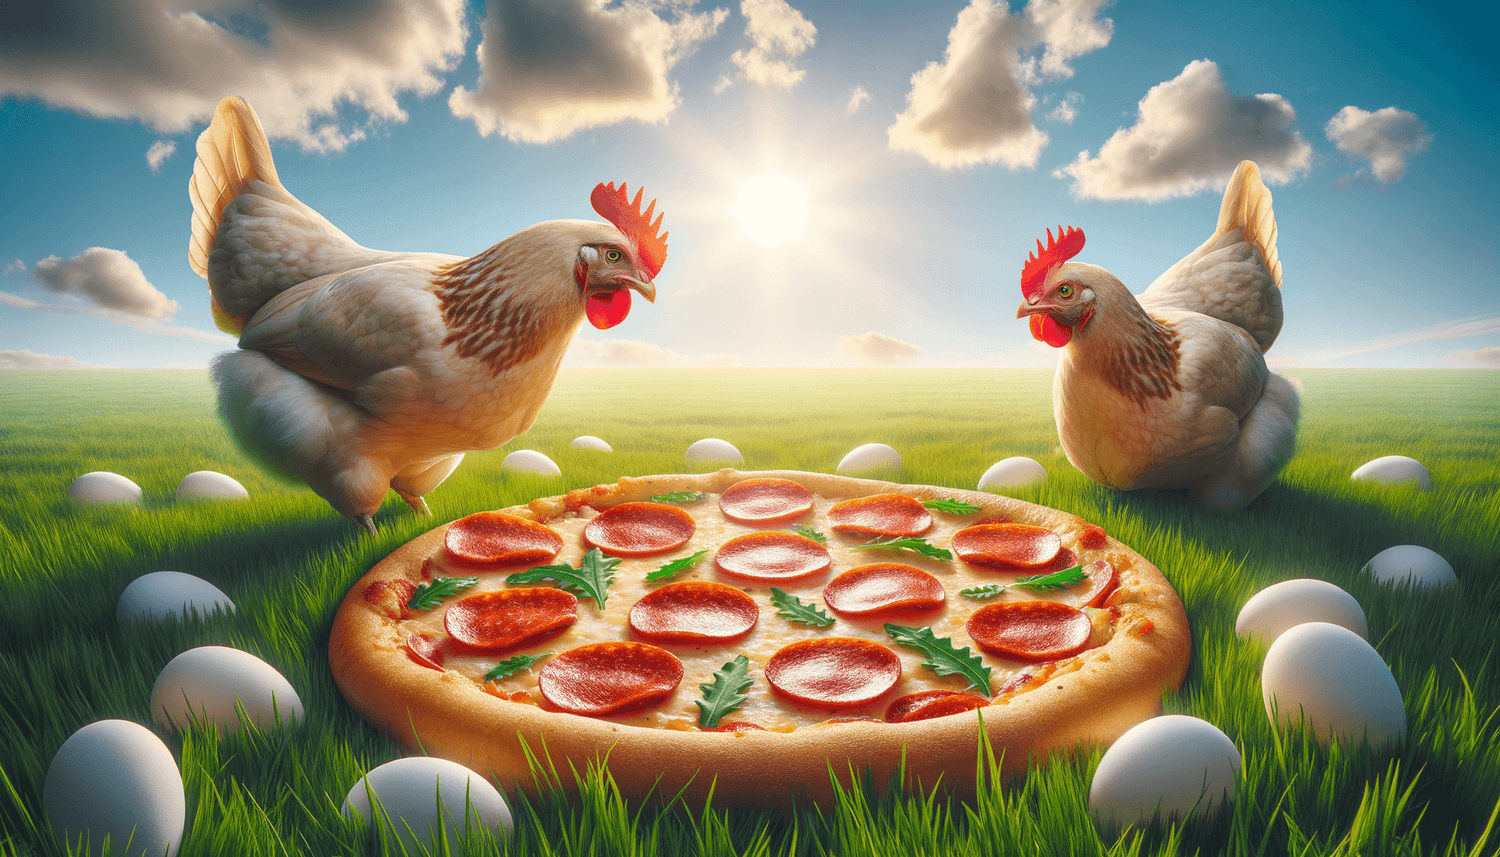 Can Chickens Eat Pepperoni?